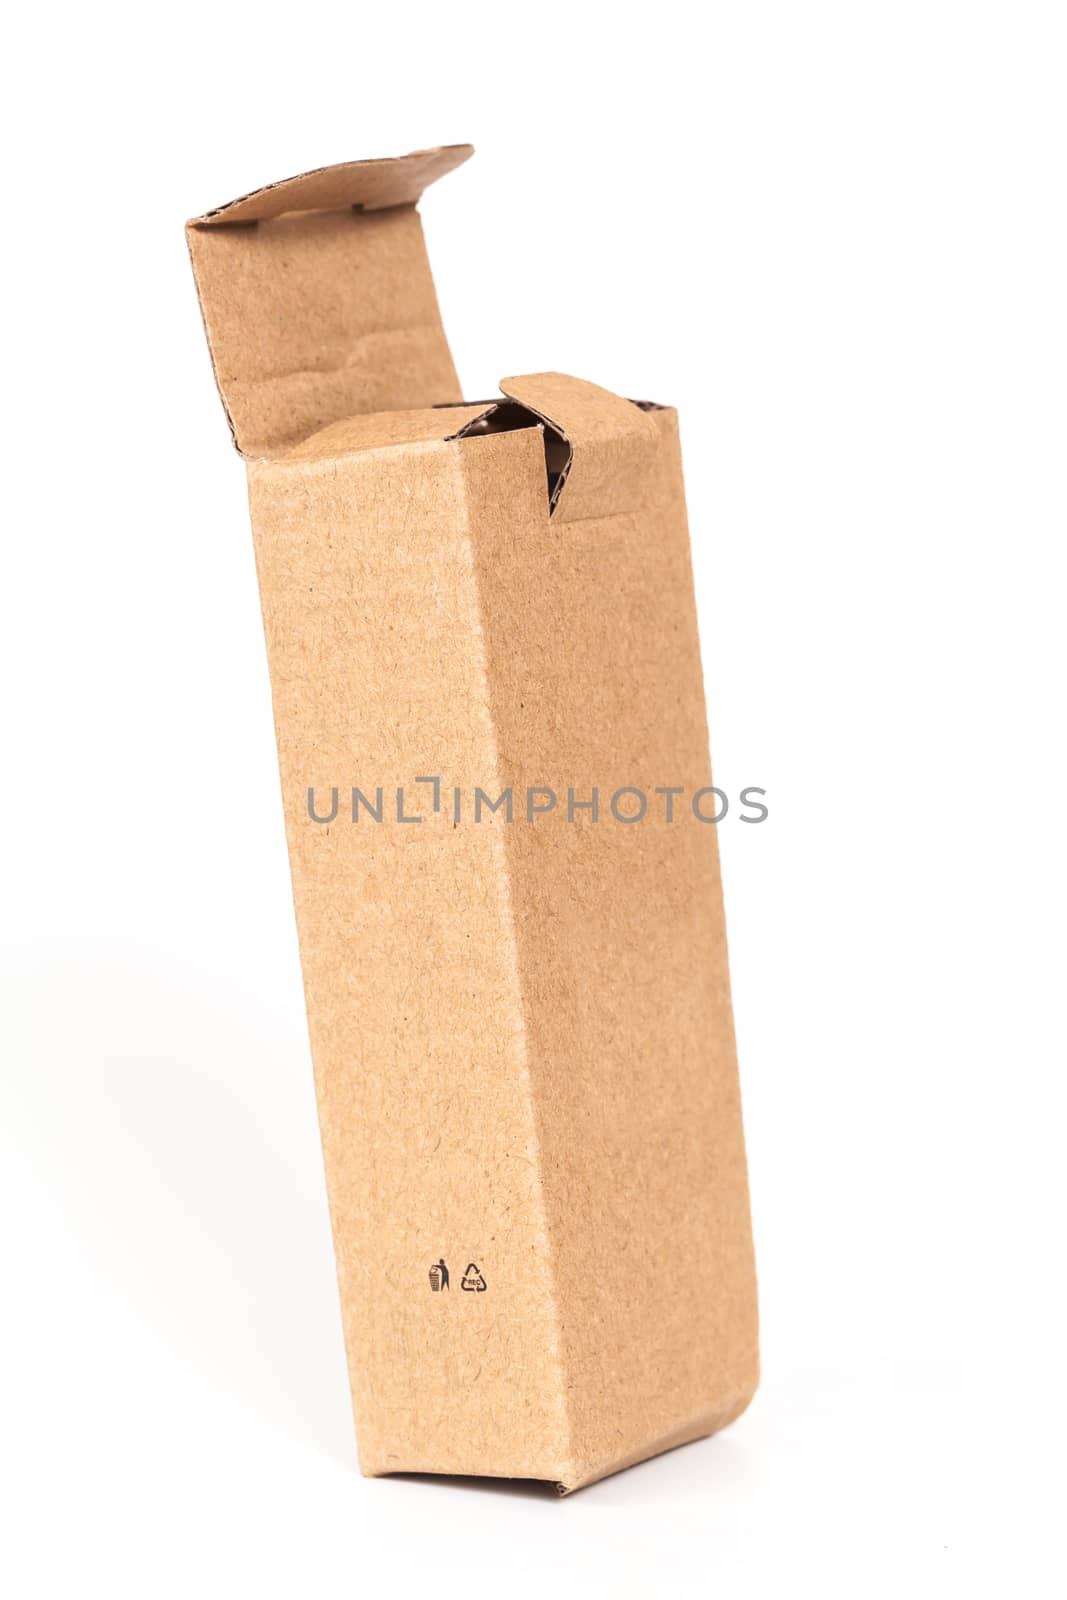 cardboard box , isolated on a white background.